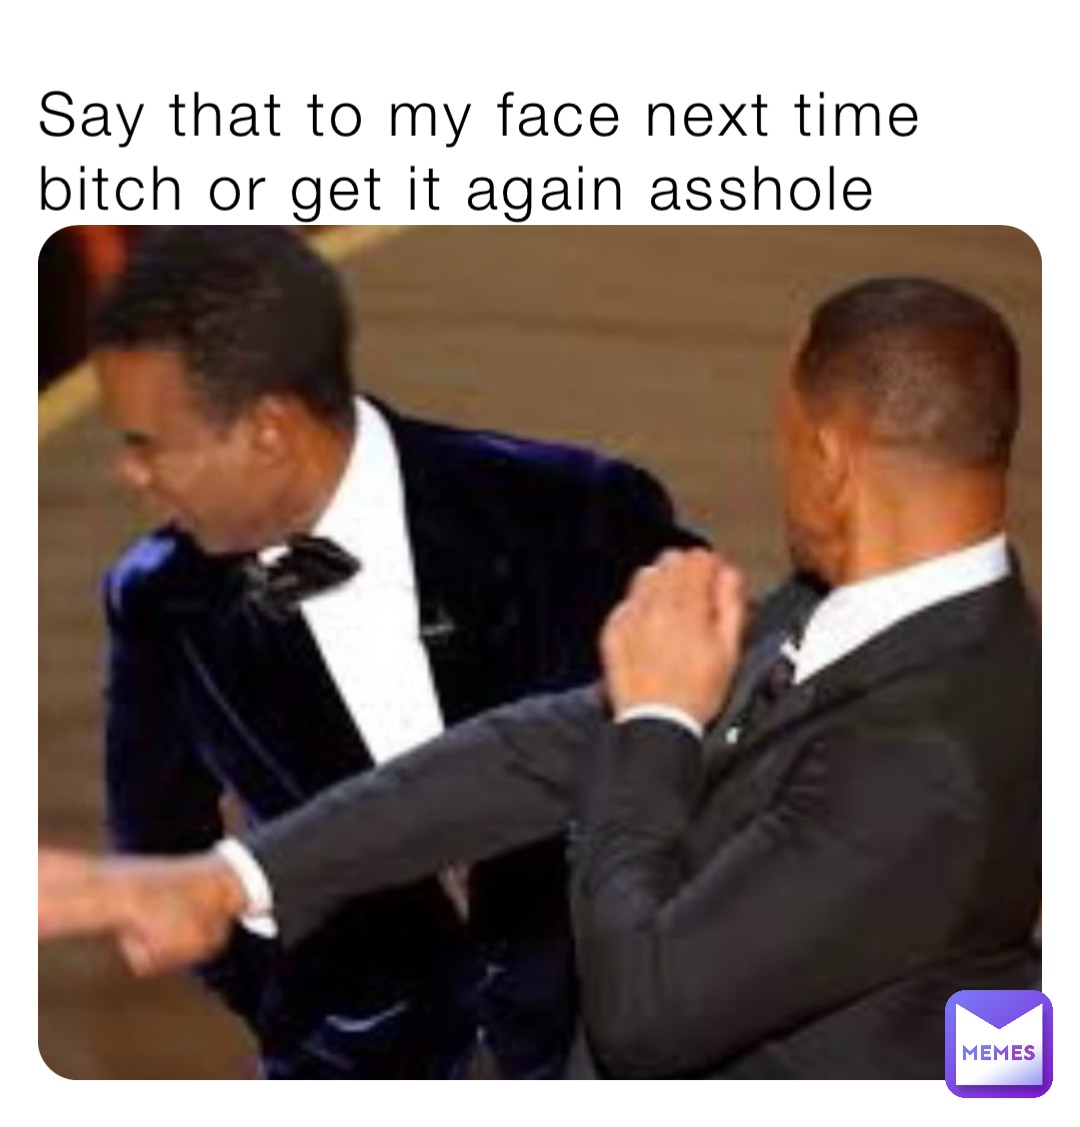 Say that to my face next time bitch or get it again asshole